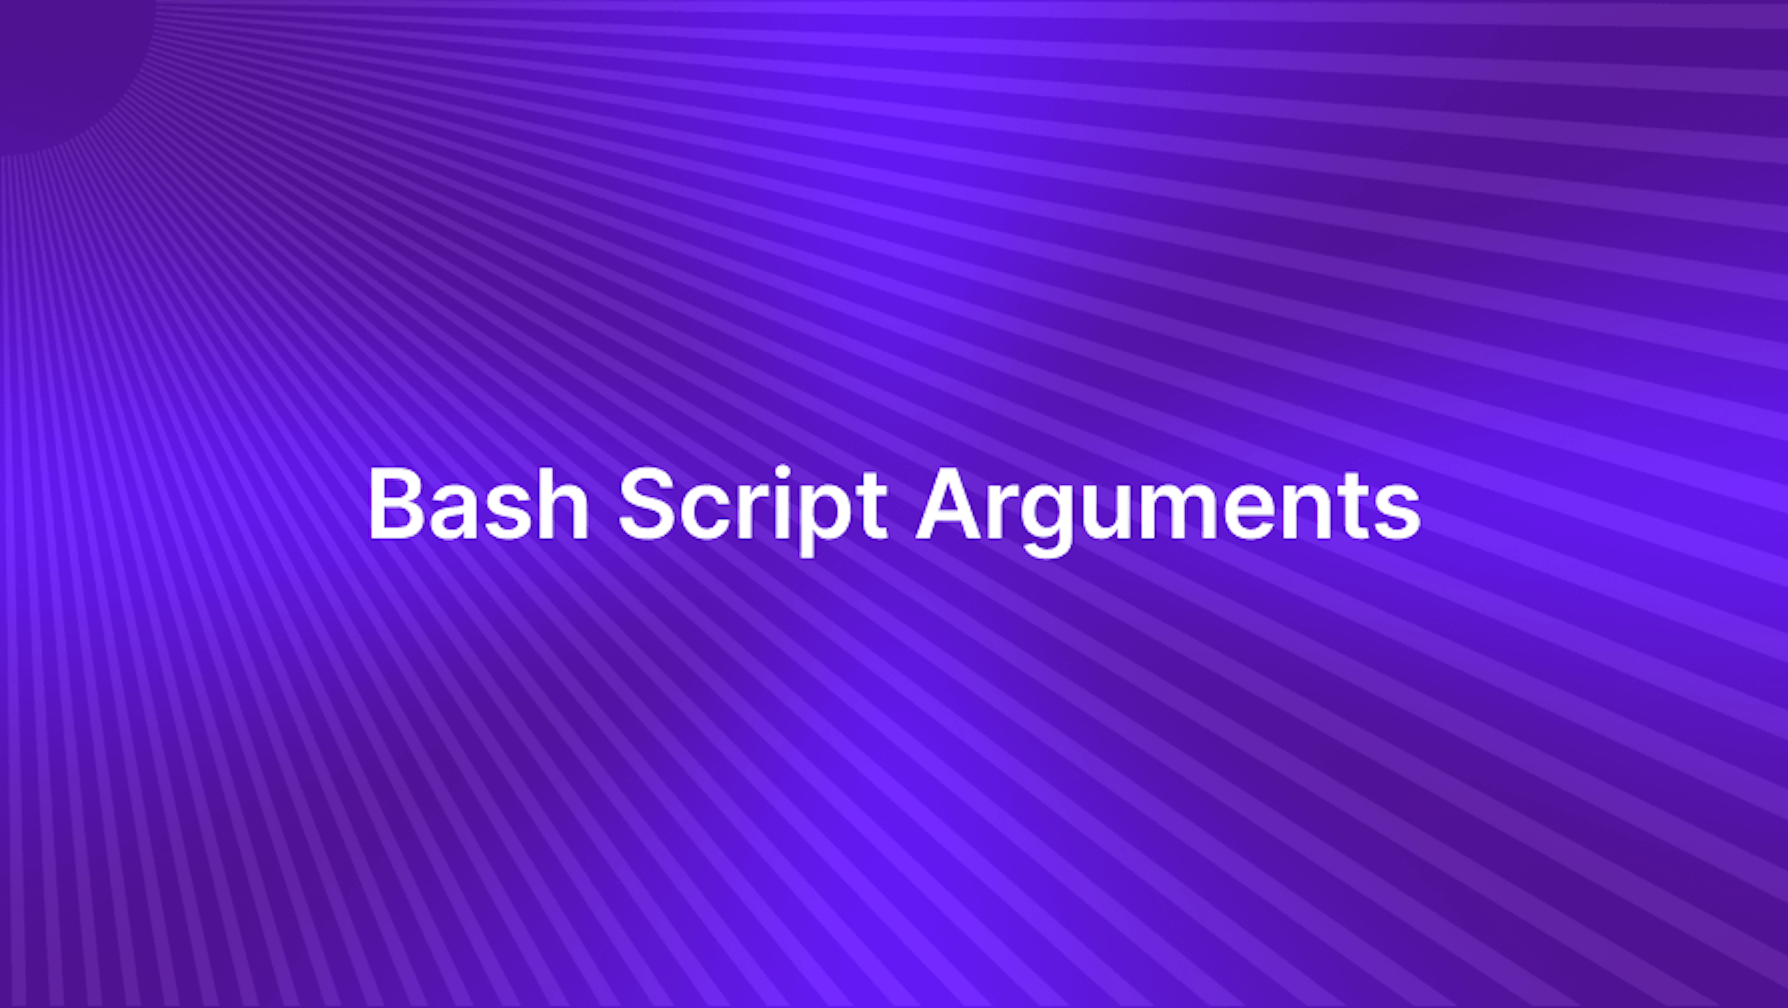 Using Arguments in Bash Scripts